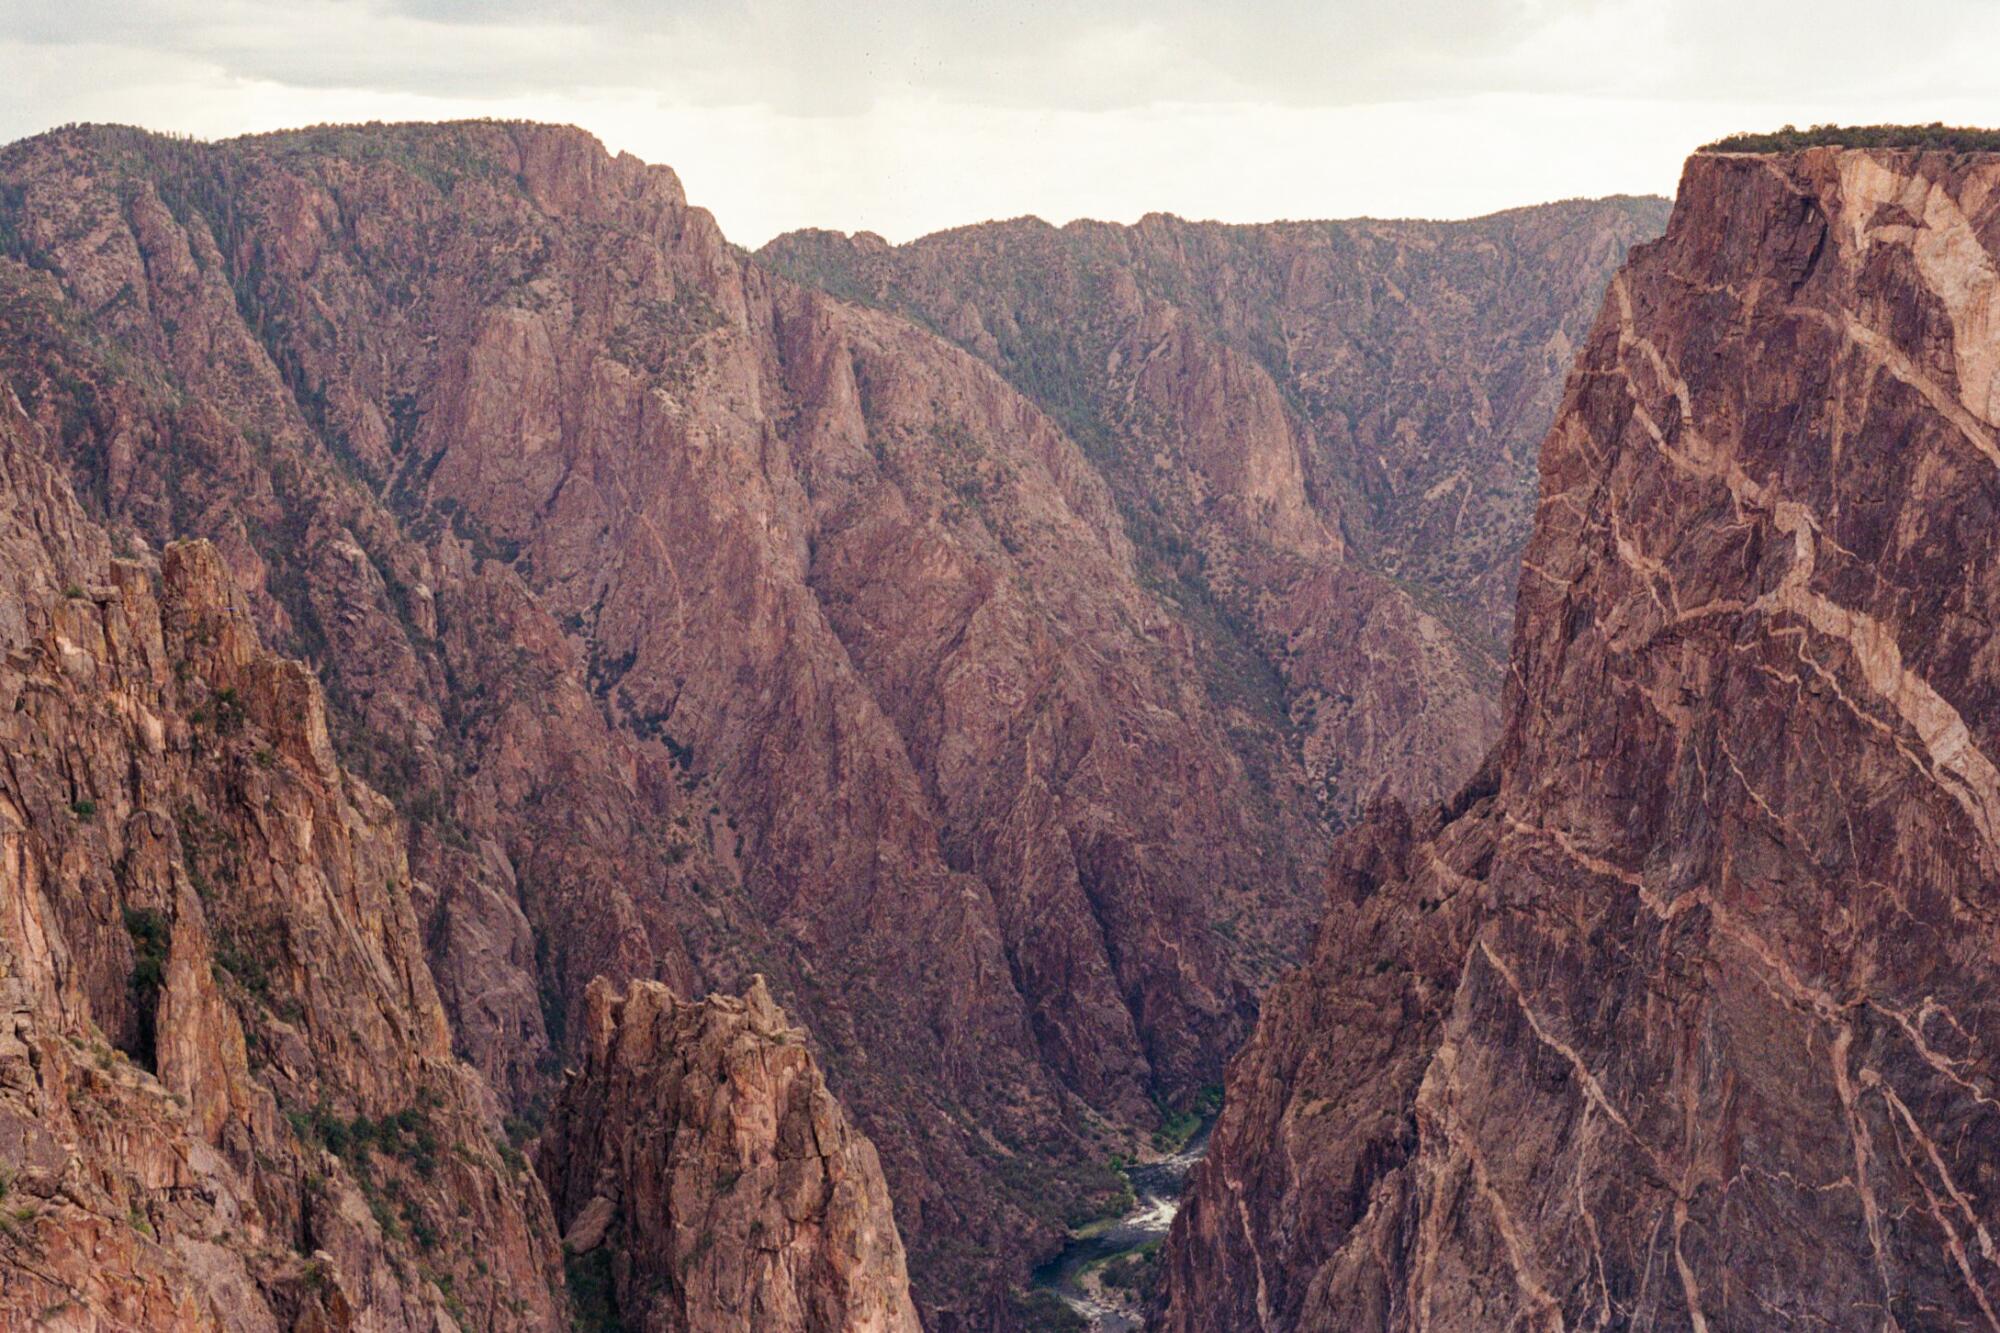 Colorado's Black Canyon, which has some of the world's oldest exposed rocks.